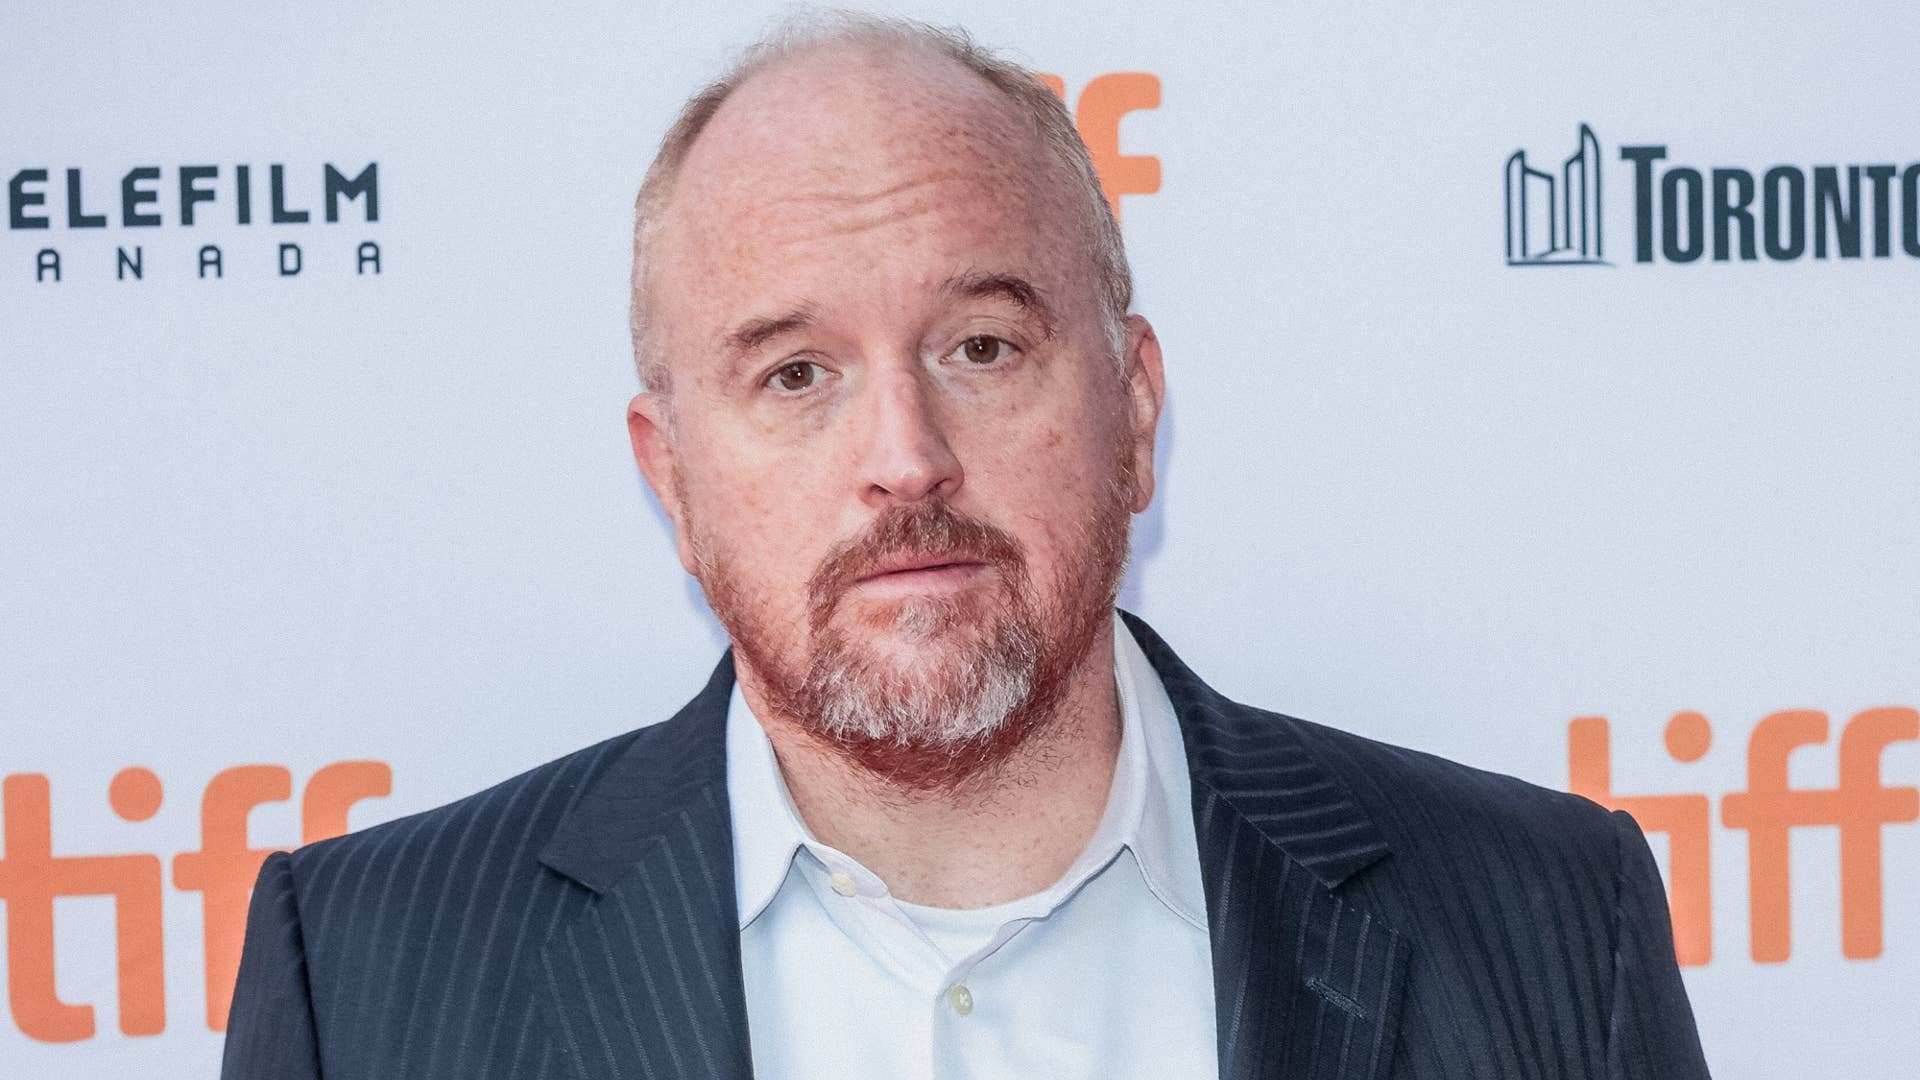 Louis CK is pictured on a red carpet for an event